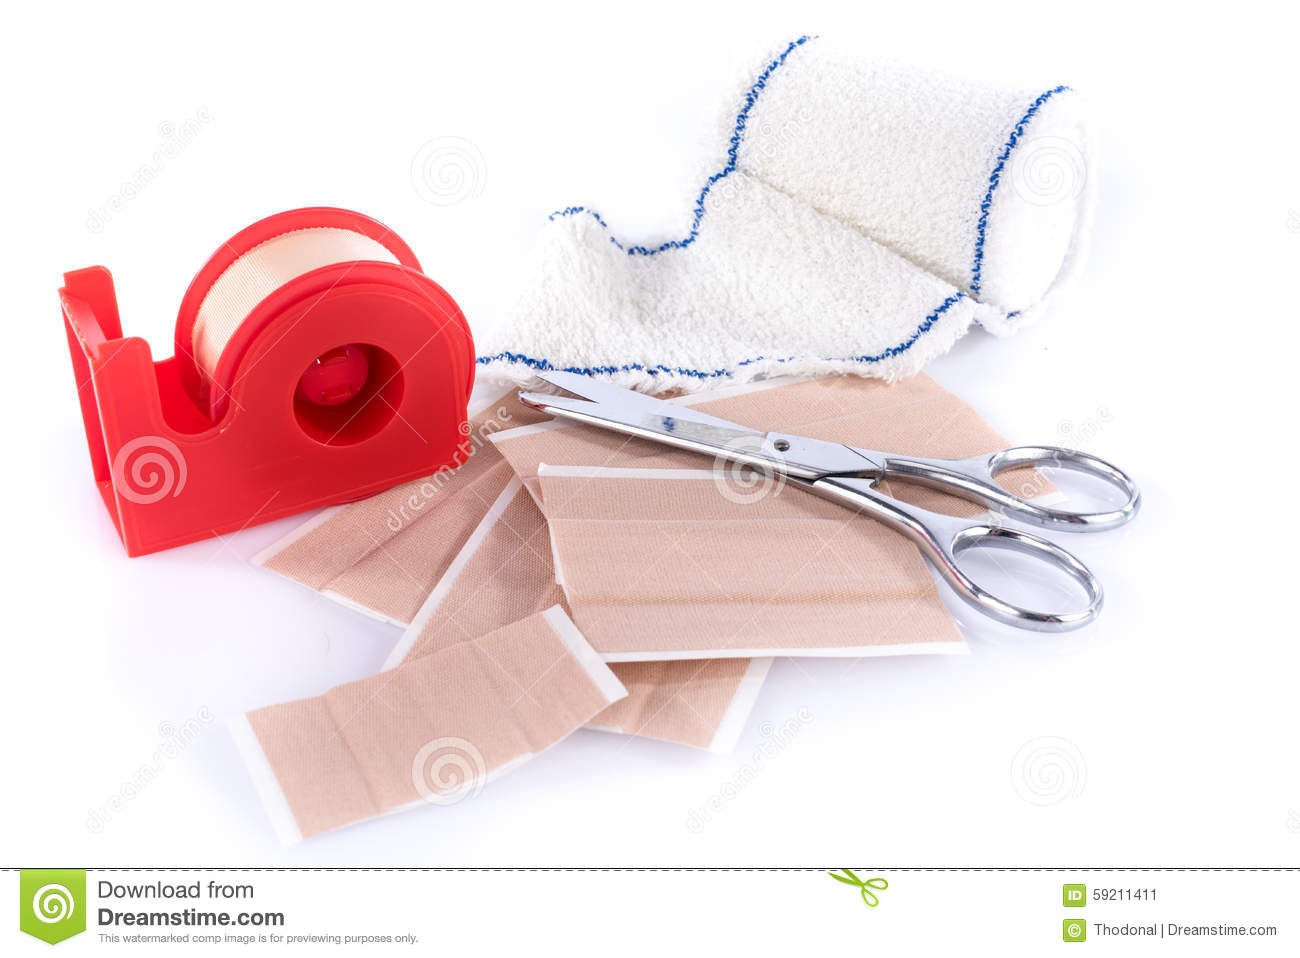 Plasters And Medical Bandage With Scissors Isolated On White